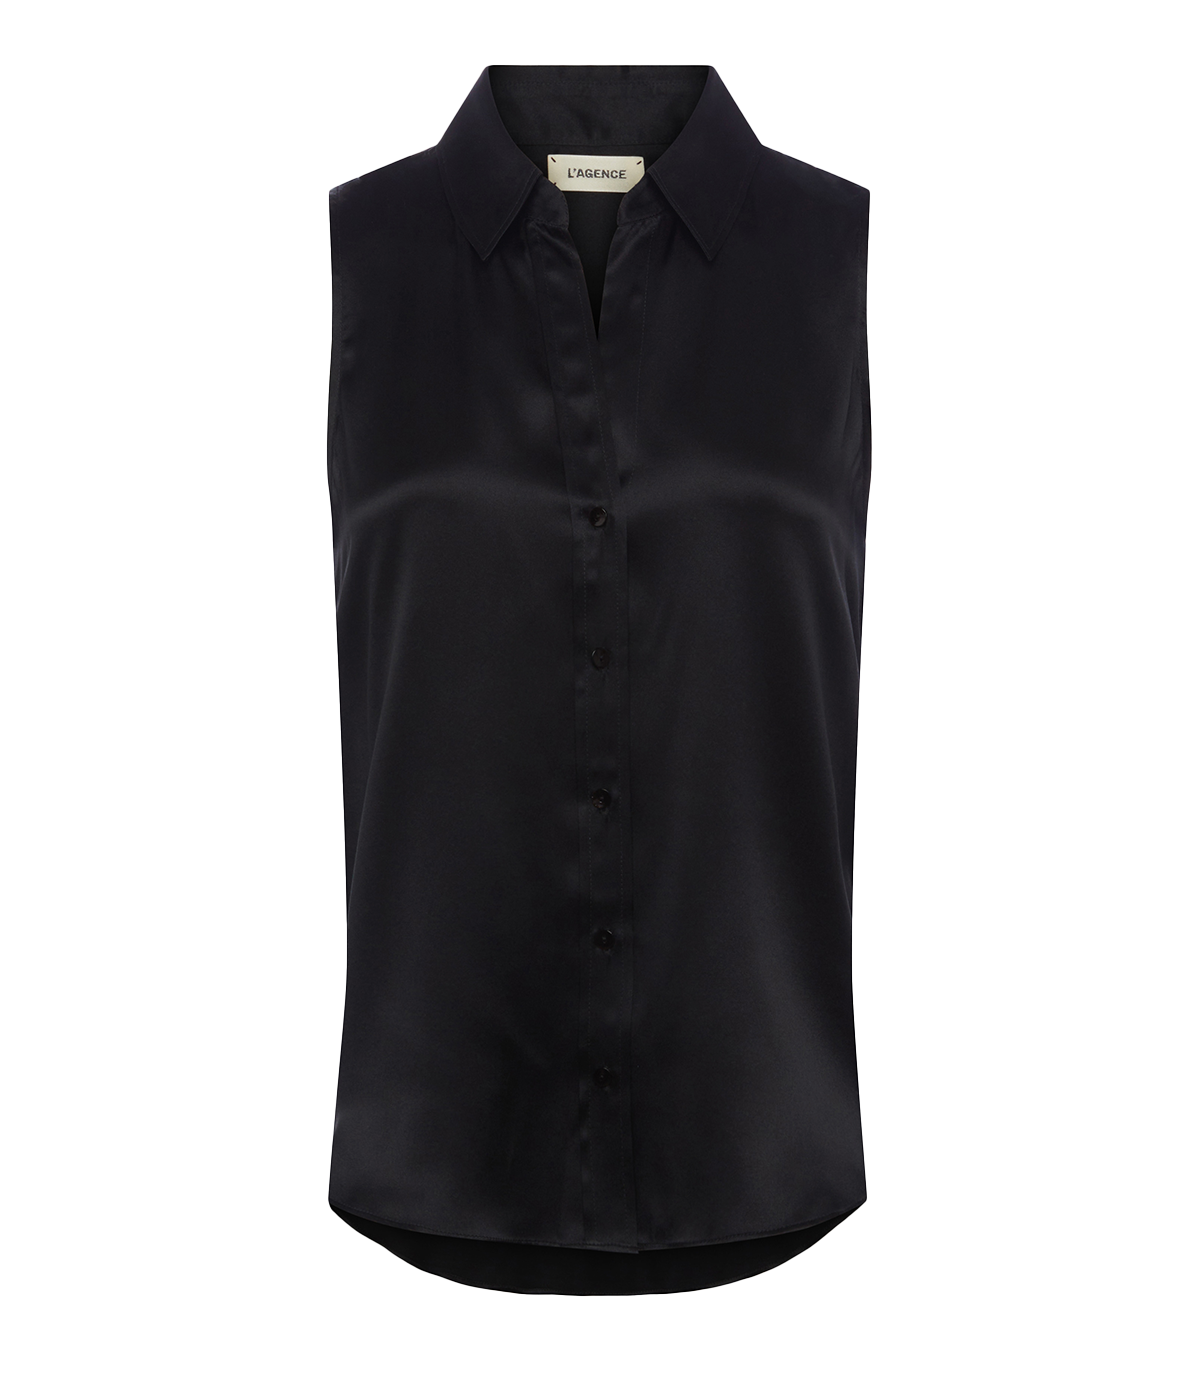 A sleeveless silk blouse, with collar detailing, classic relaxed fit and mother of pearl buttons. 100% silk, everyday top, workwear, throw on and go, bra friendly, made in USA. 